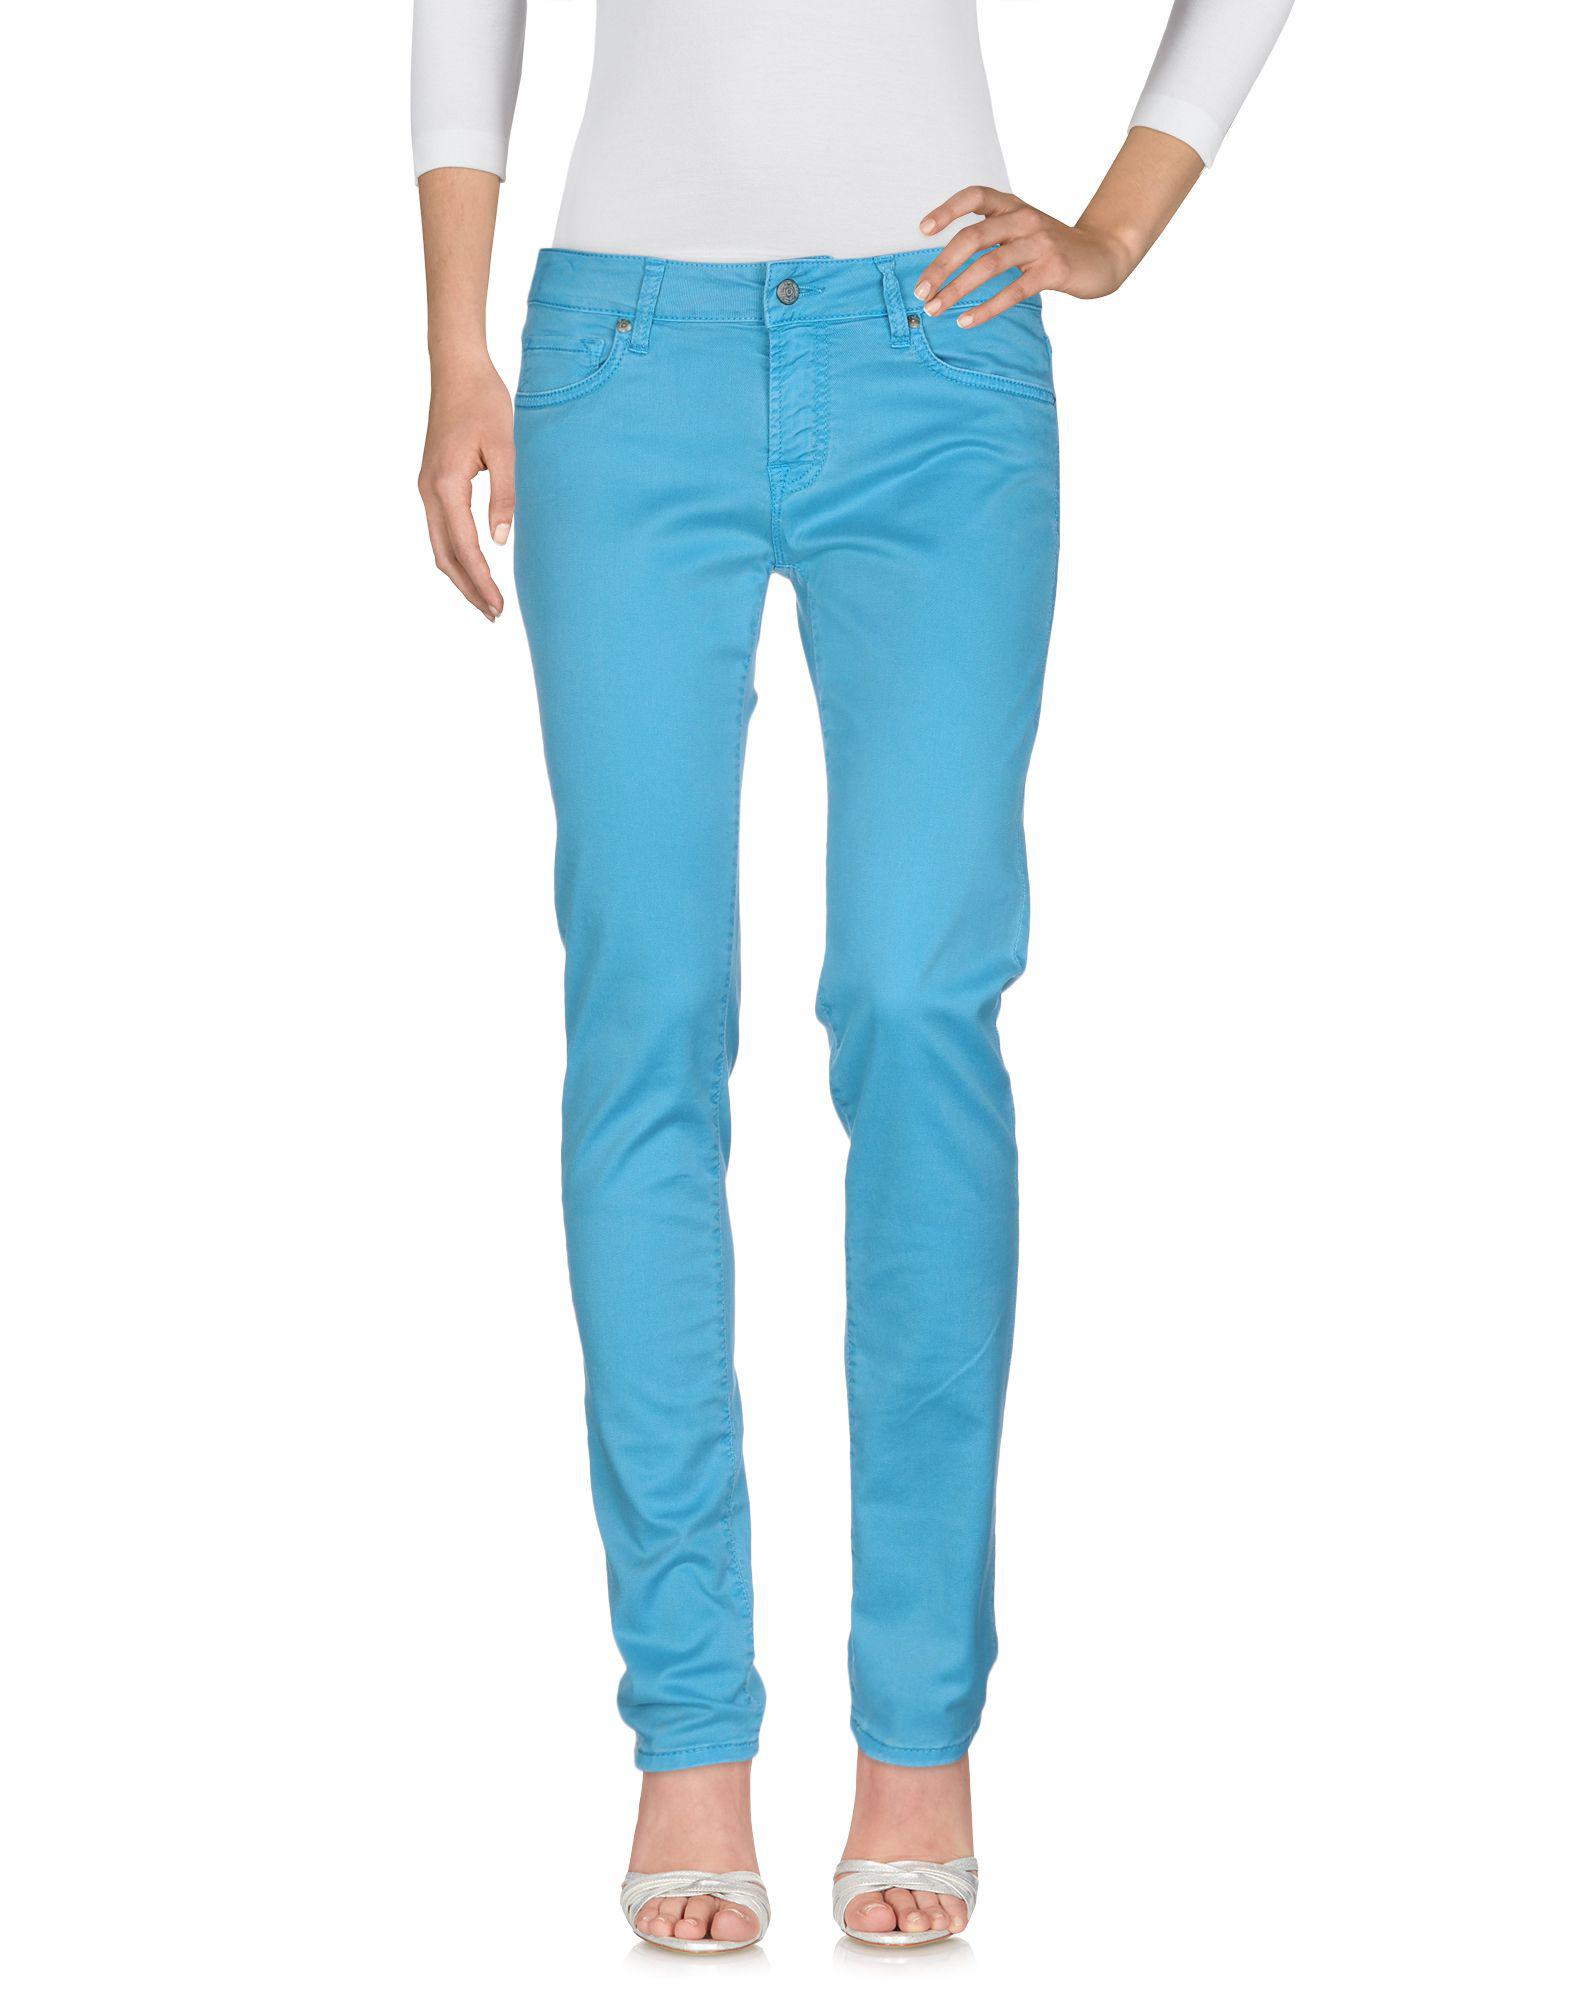 Roy Rogers Denim Pants in Turquoise (Blue) - Lyst